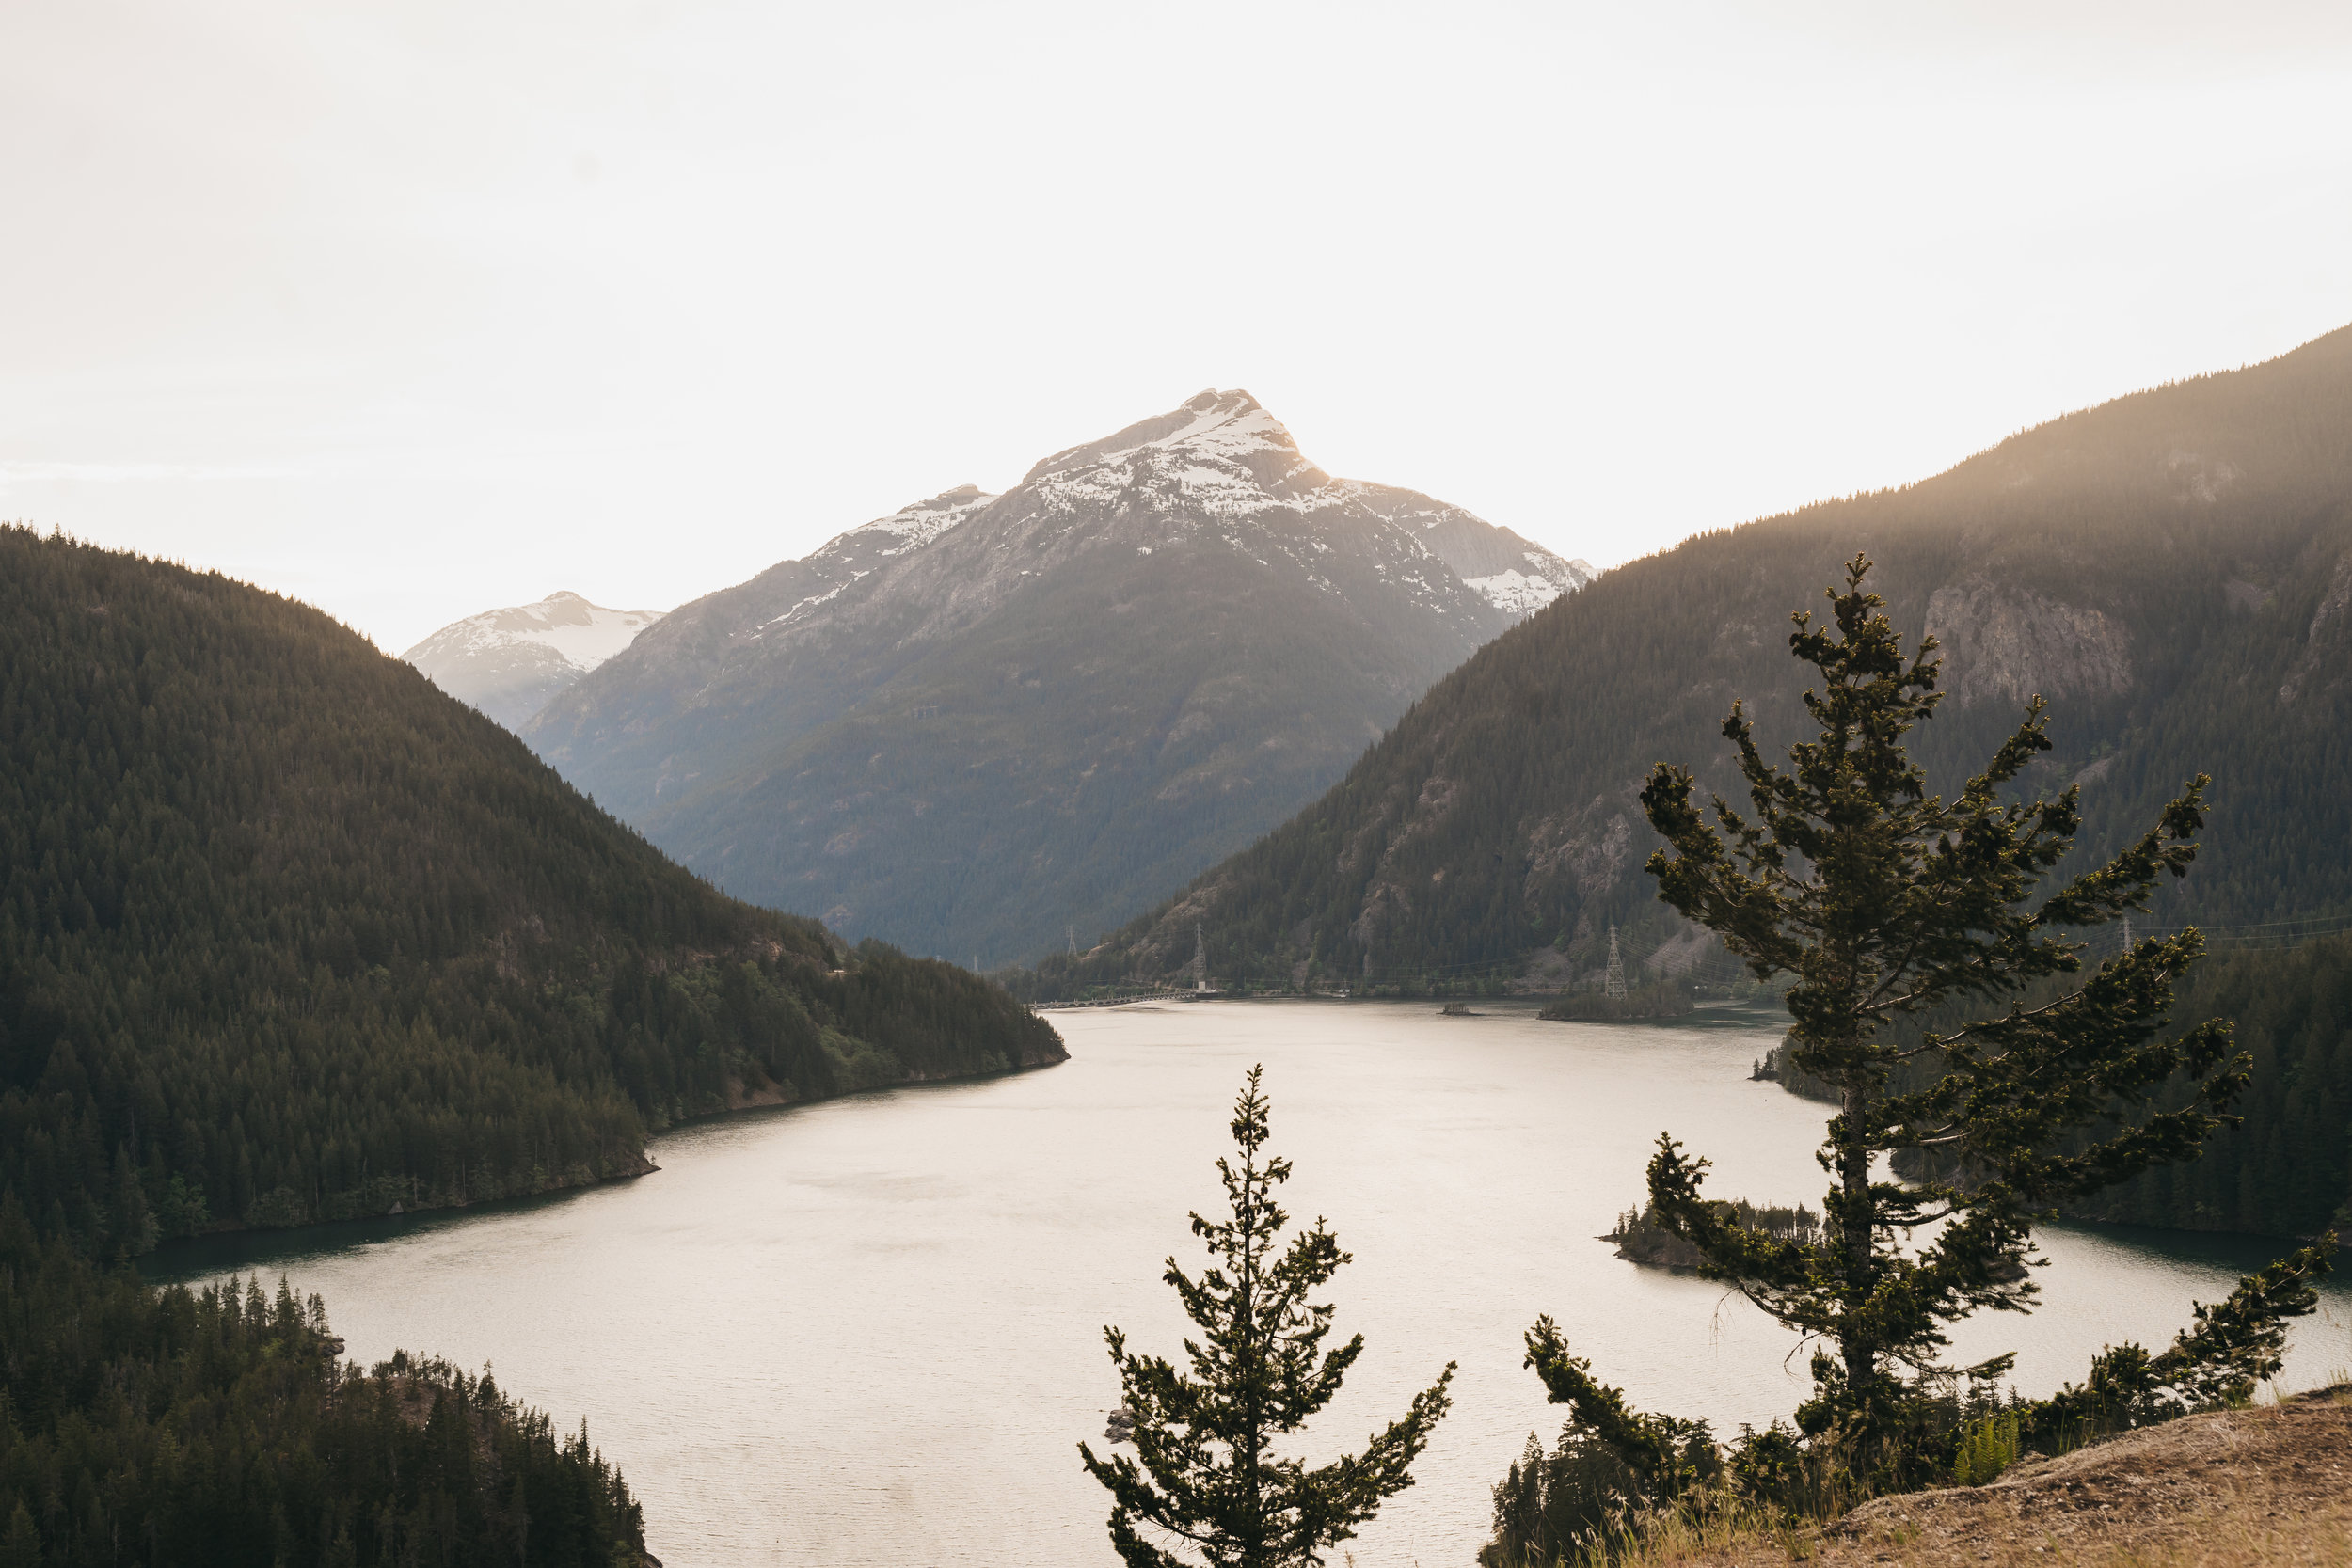 North Cascades Engagement Session | Between the Pine Adventure Elopement Photography